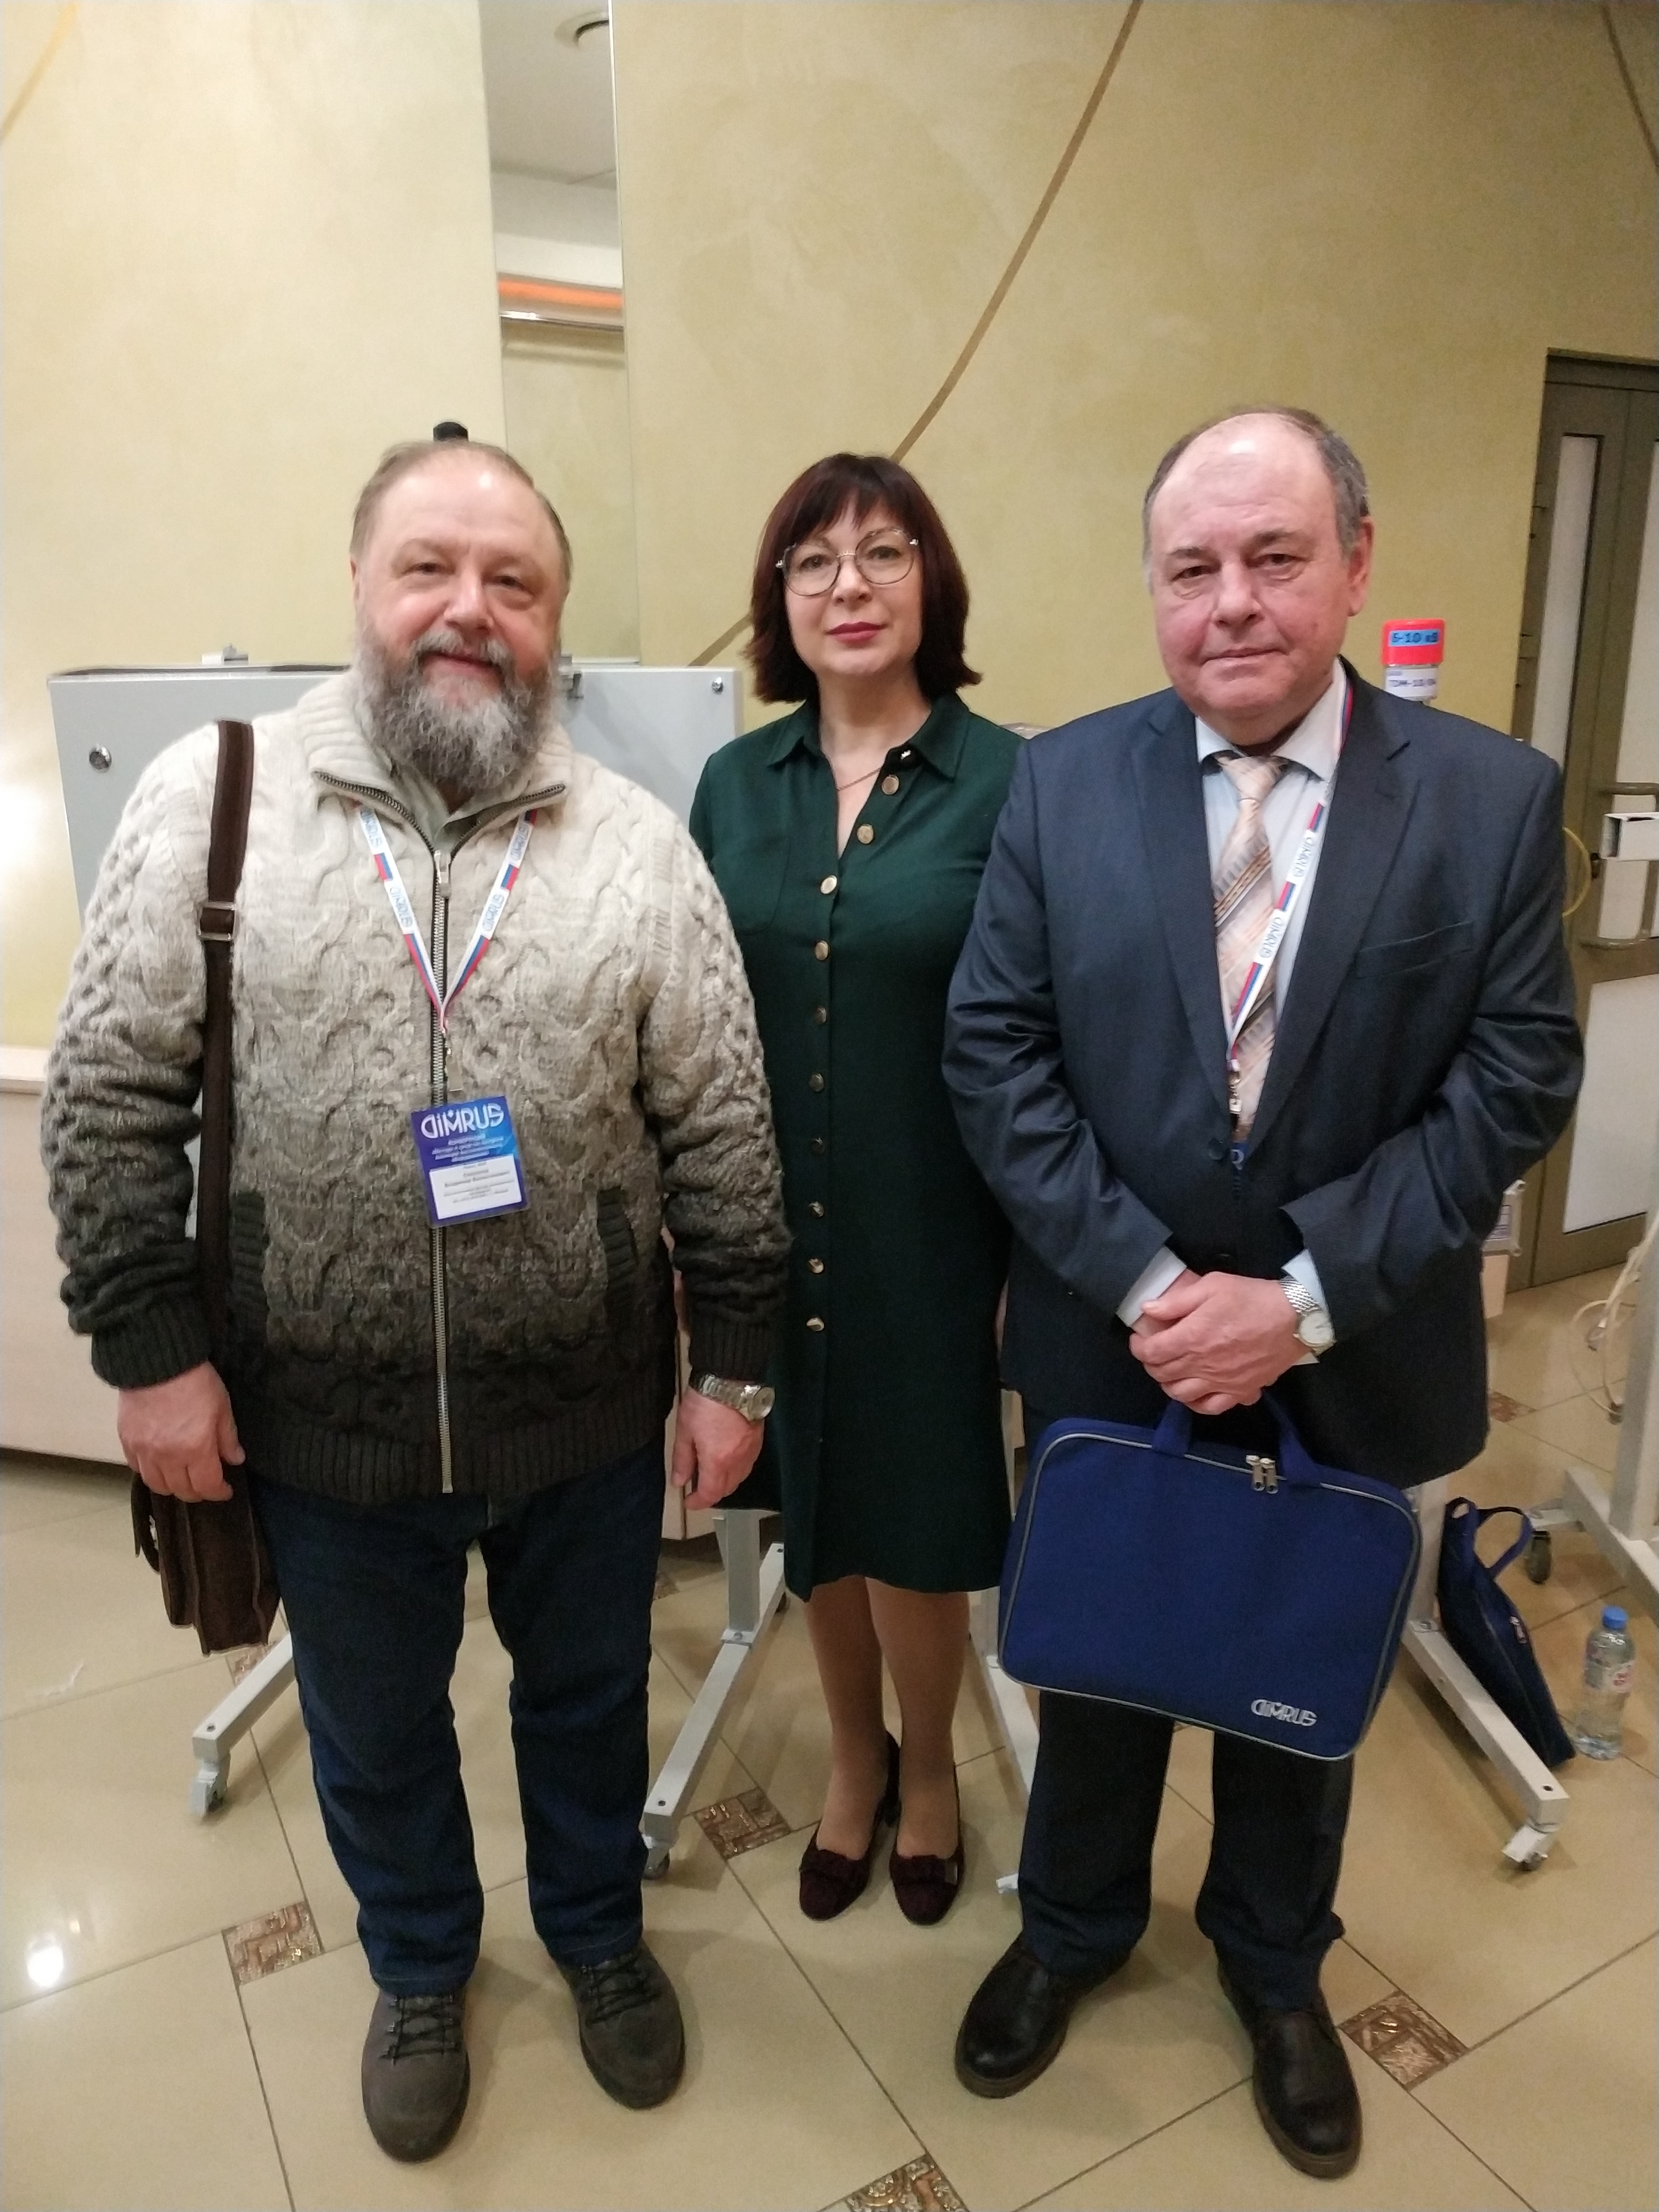 Vladimir Smekalov, Head of the Reliability and Assets Management Center of the Research and Development Center at Federal Grid Company of Unified Energy System (left), Marina Vladimirova and Vladimir Ustinov, participants in the 17th conference of the Dimrus company in Perm